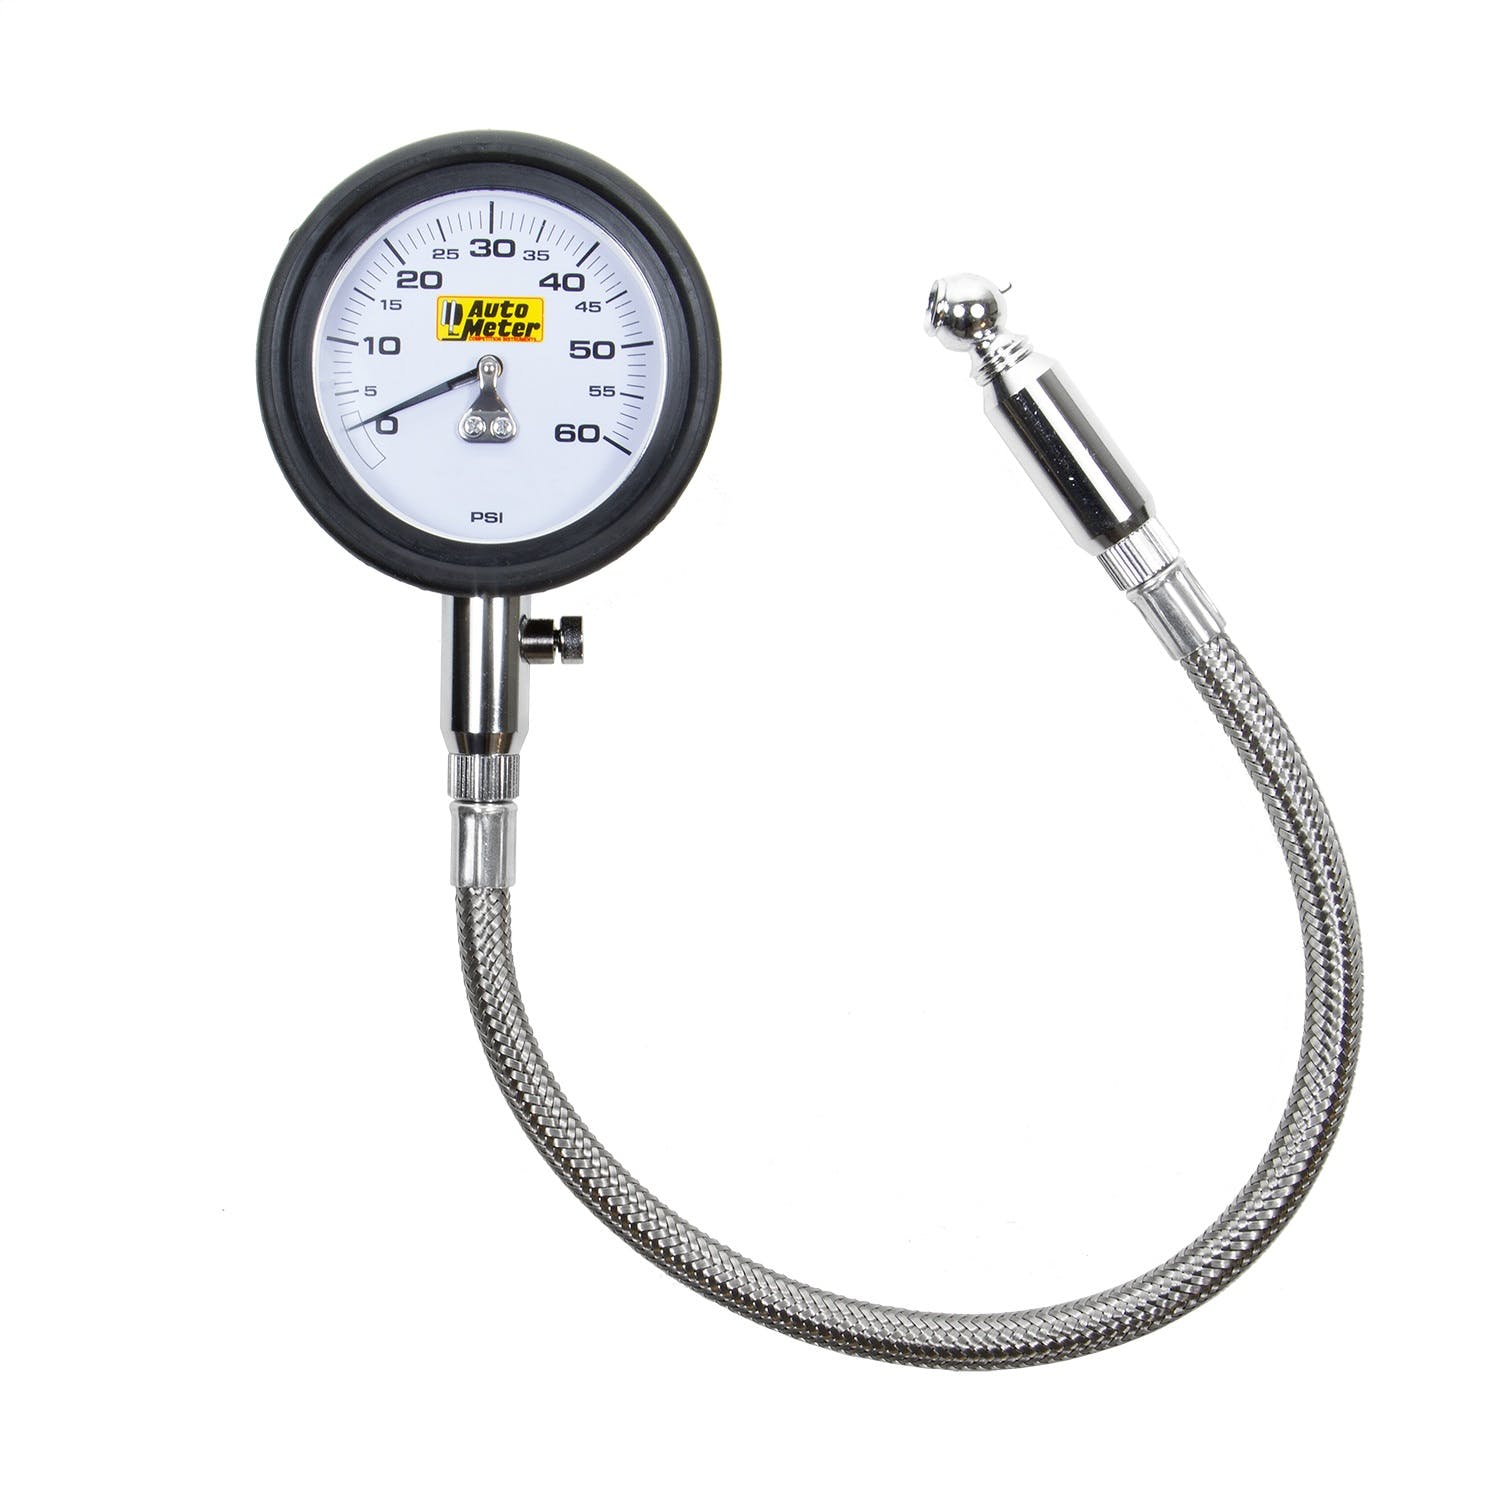 AutoMeter Products 2160 Professional-Grade Tire Pressure Gauge (0-60 PSI)